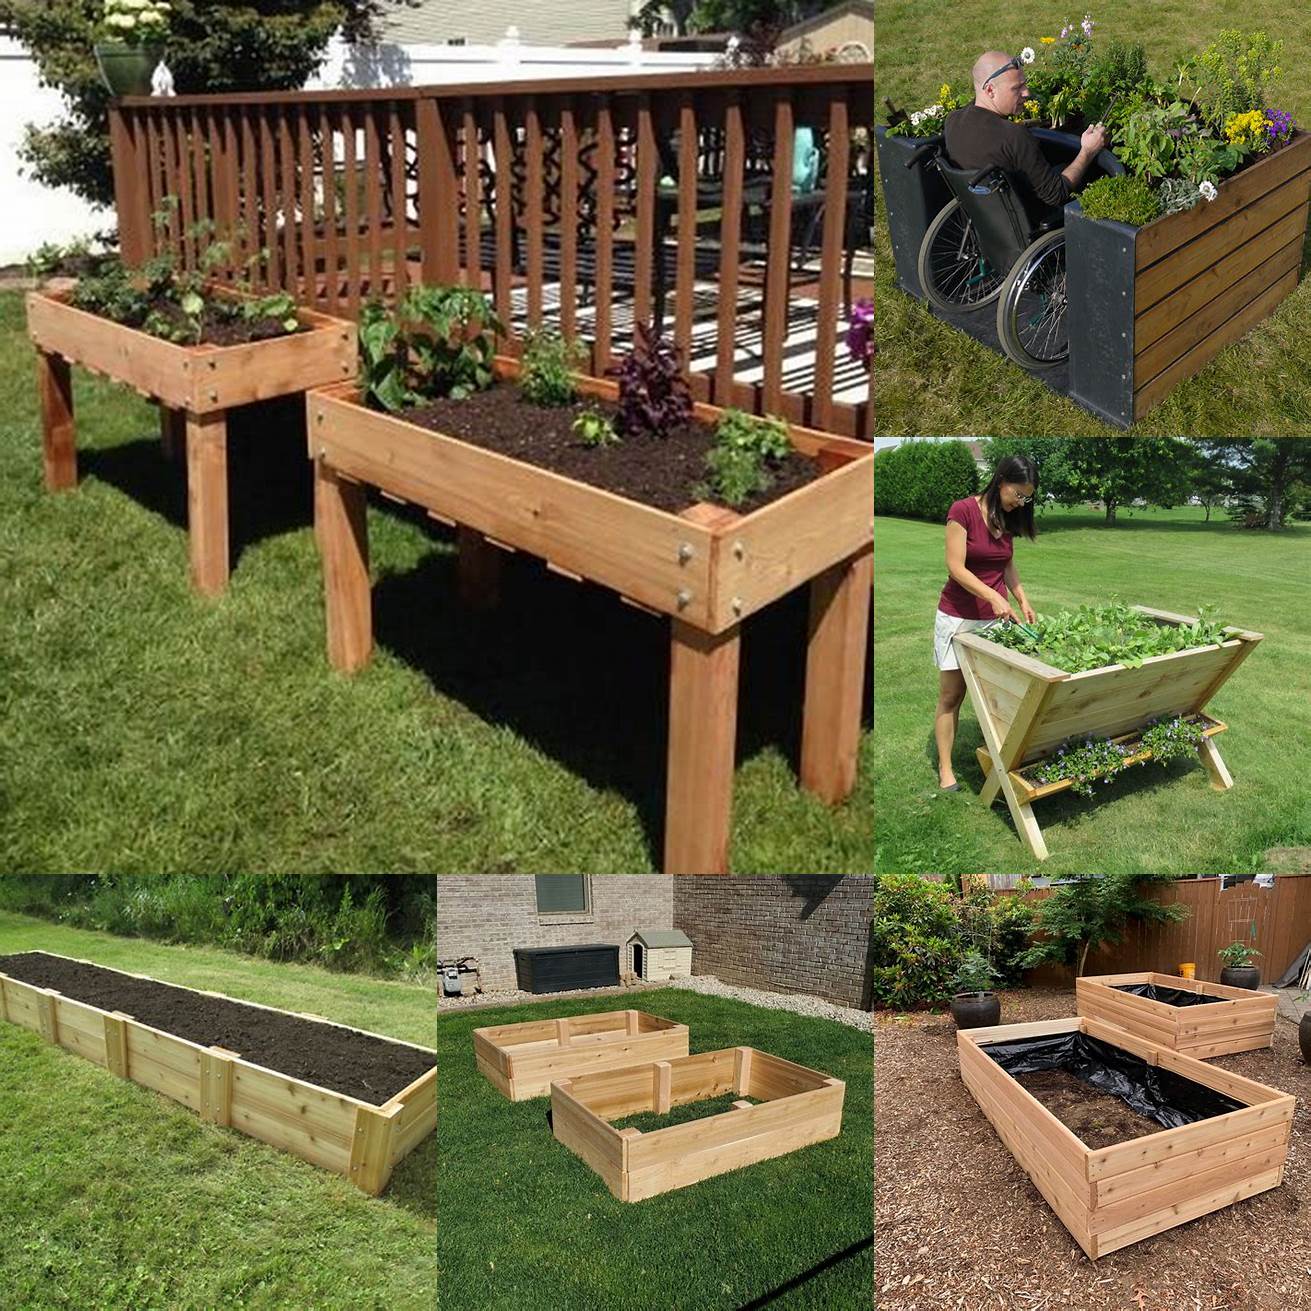 Easier Access Cedar Raised Garden Beds are easier to access especially for those with mobility issues